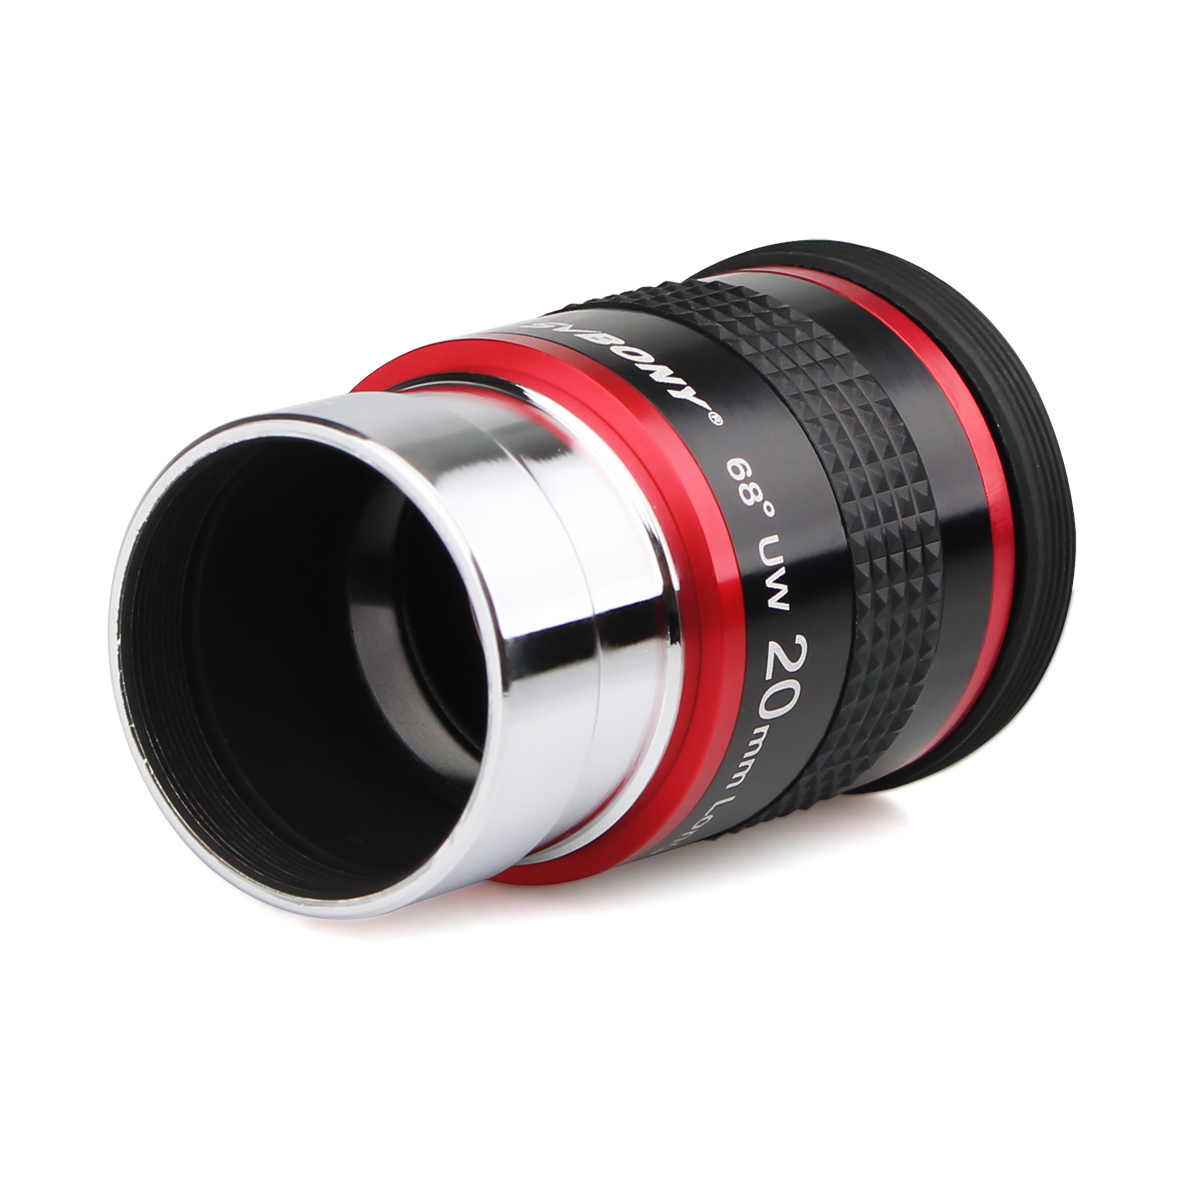 15mm SVBONY Telescopes Eyepieces 1.25 inches Eyepiece 68 Degree Ultra Wide Angle 